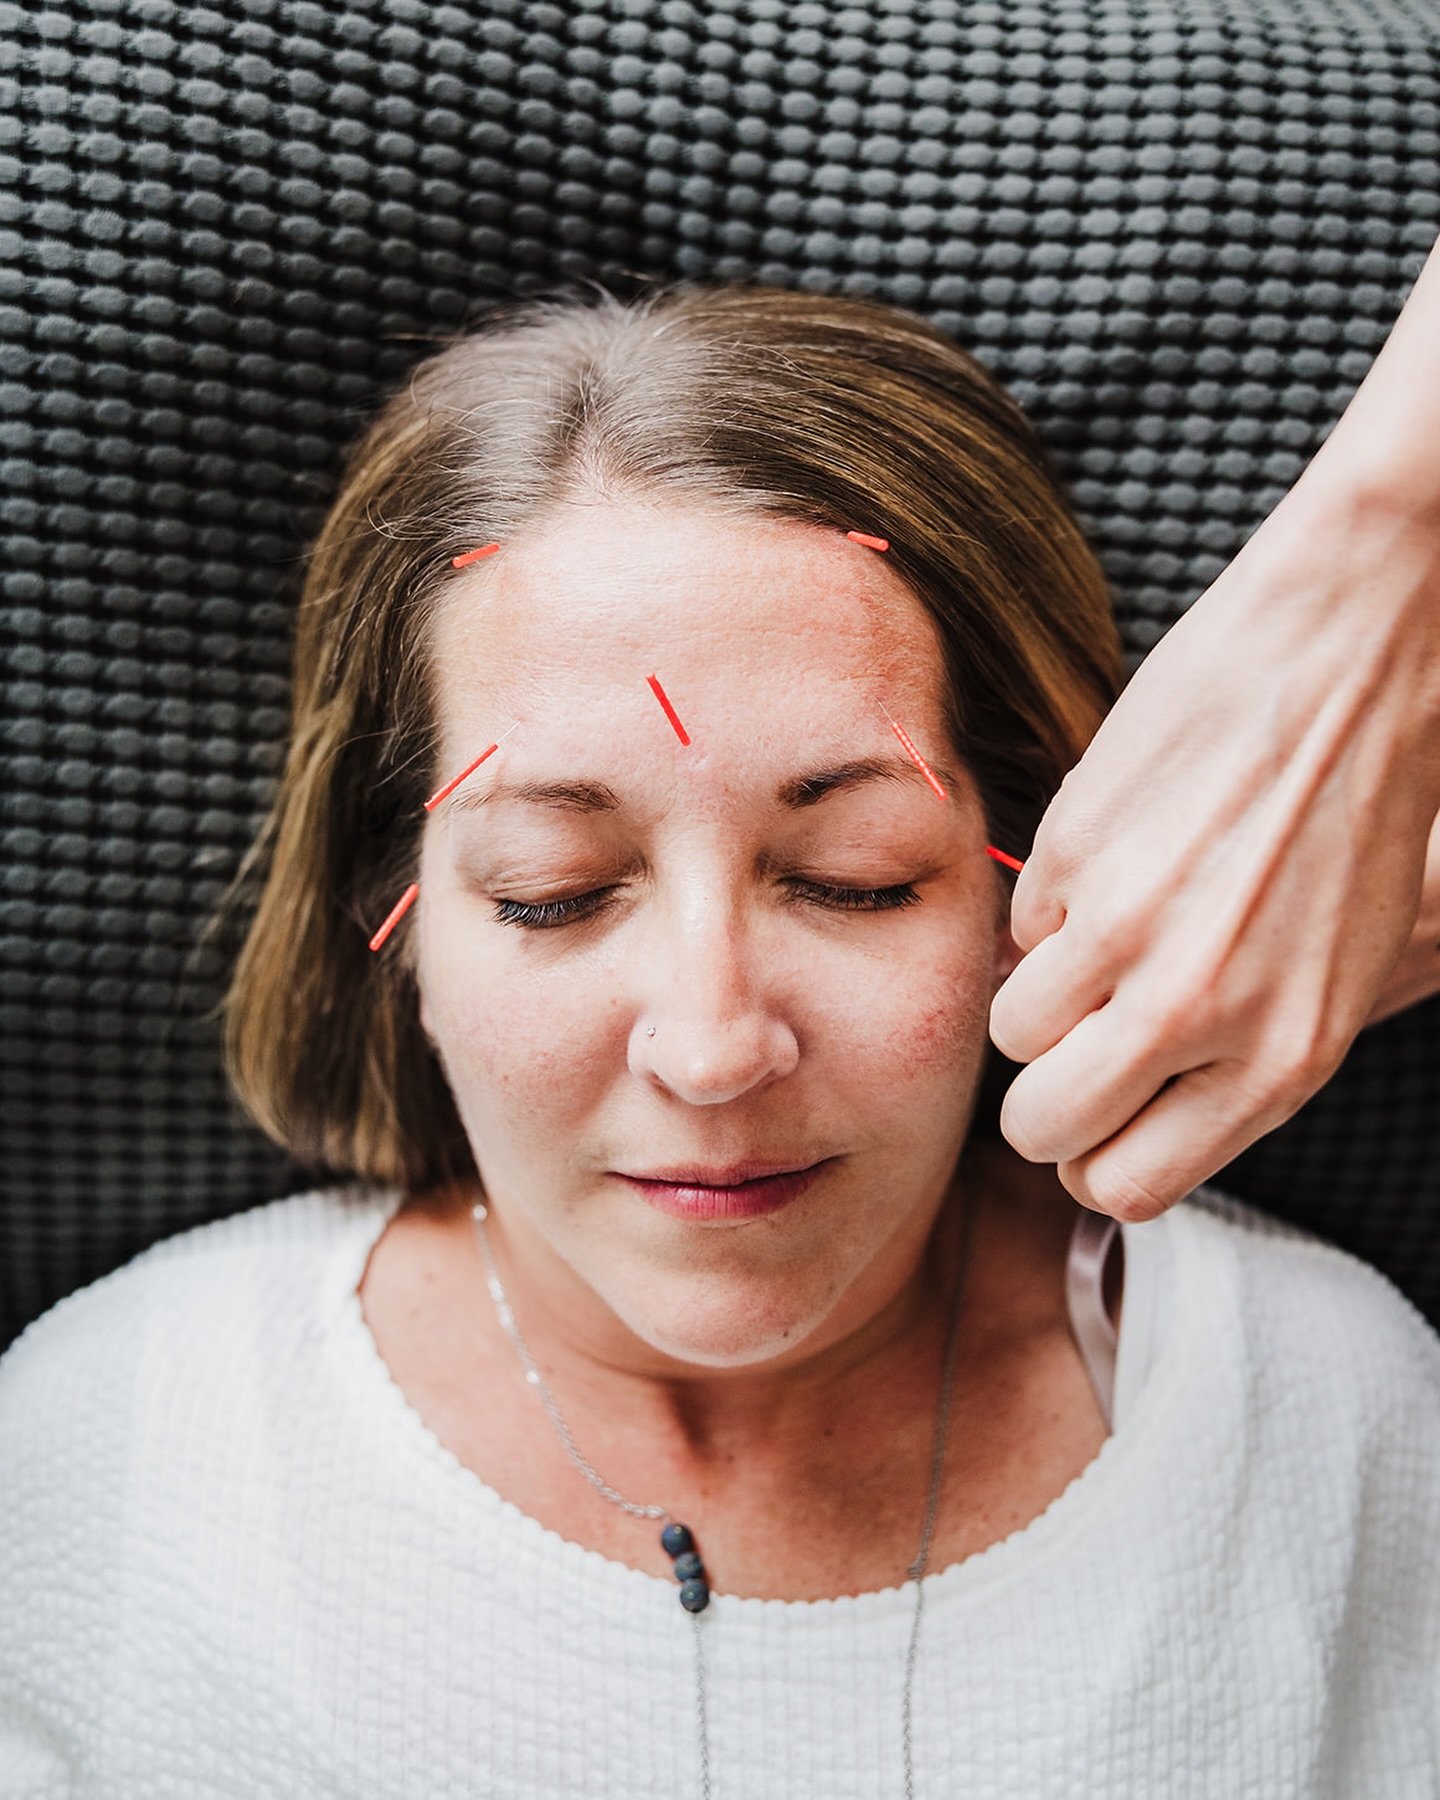 SINUSES + ACUPUNCTURE🍃🍃

How can acupuncture can help with sinus issues?

✨ Reduces Sinus Irritation by decreasing inflammation in the sinuses, relieving congestion and pressure.

✨ Improves Drainage by promoting better circulation and lymphatic fl